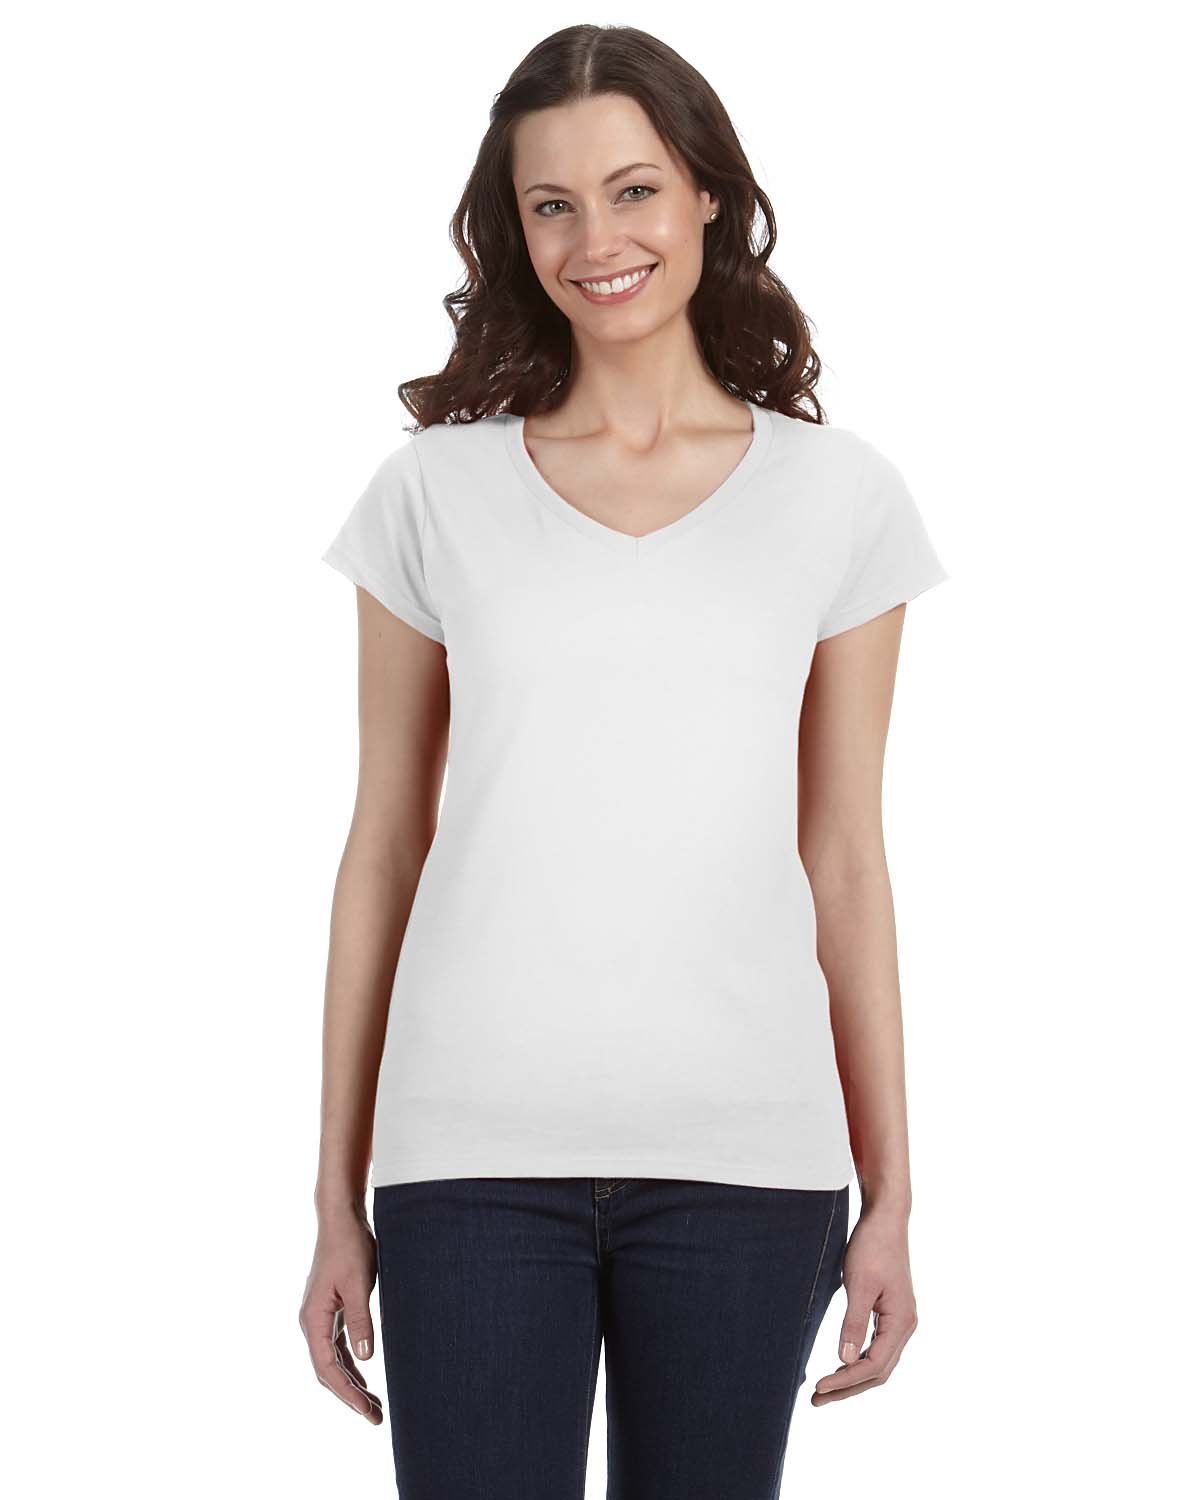 Picture of Gildan Women's SoftStyle® Fitted V-Neck T-Shirt